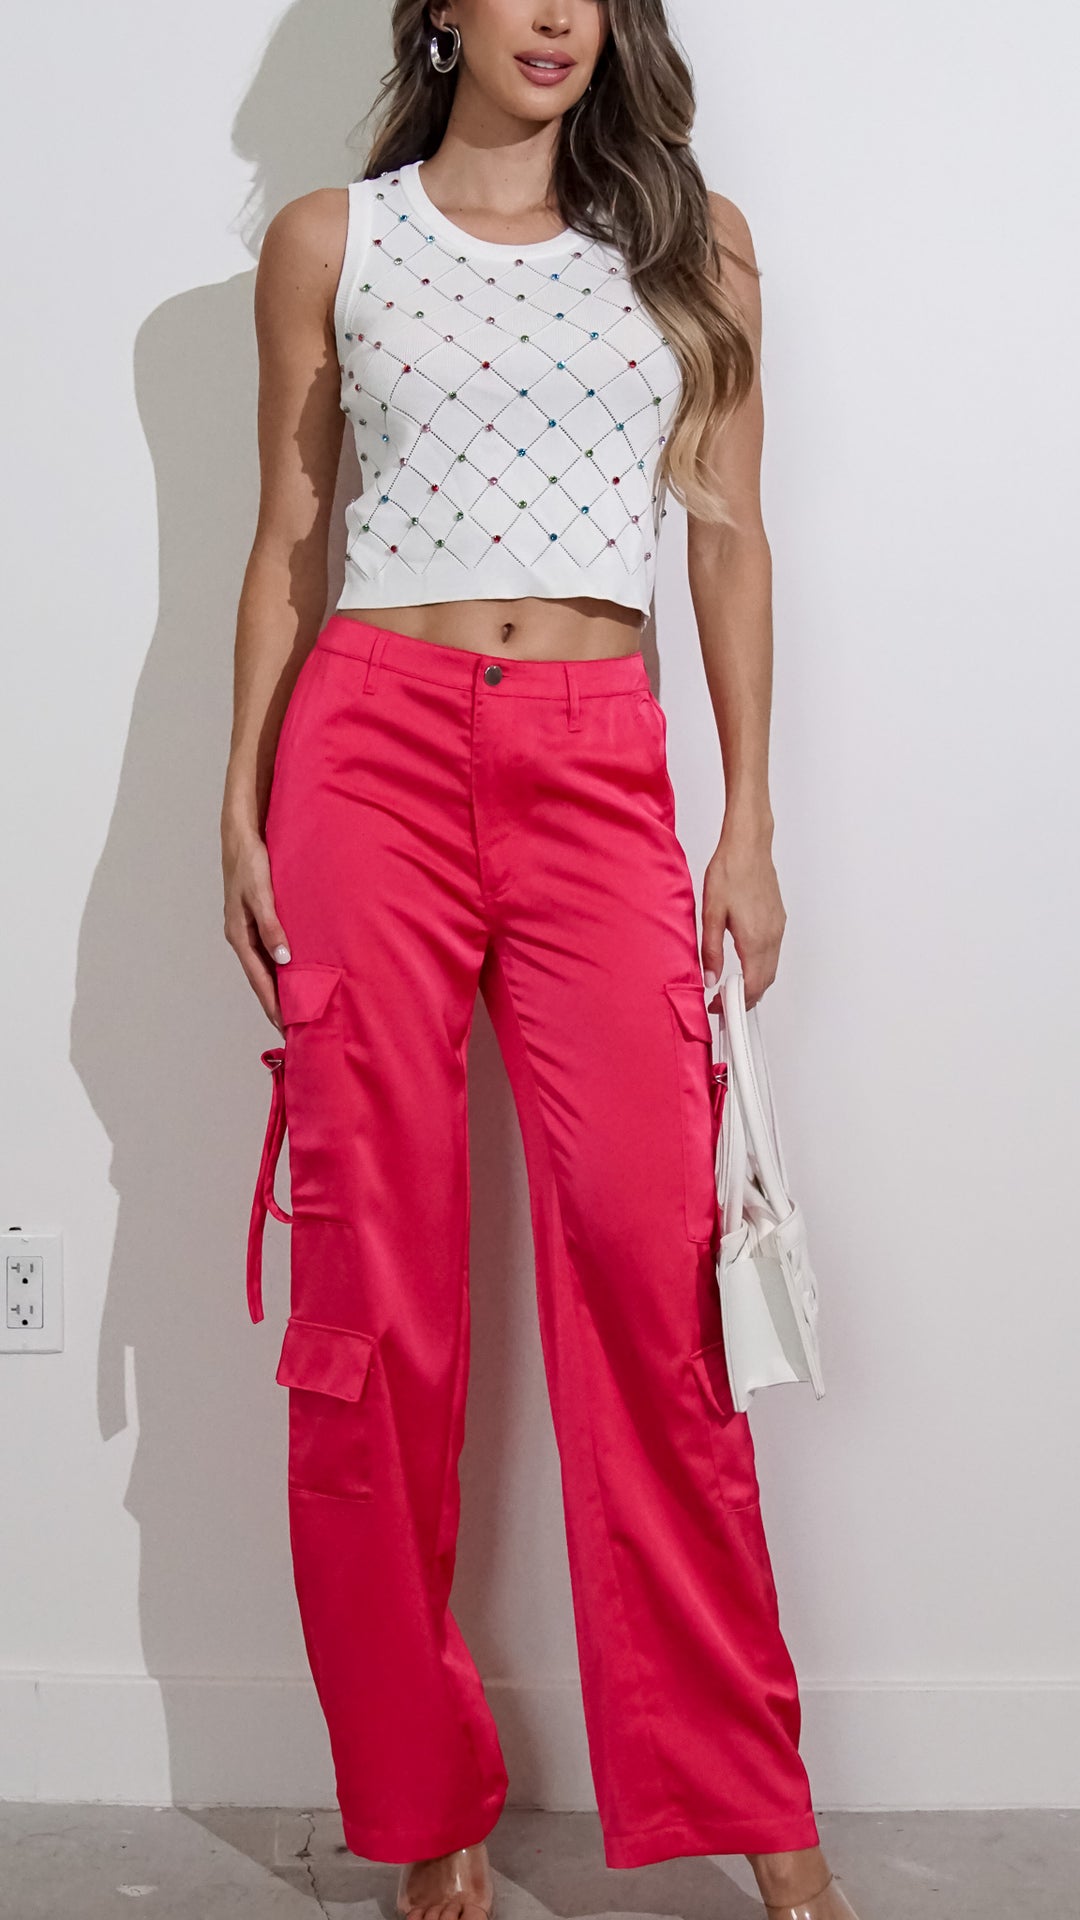 Andi Cargo Pants in Pink